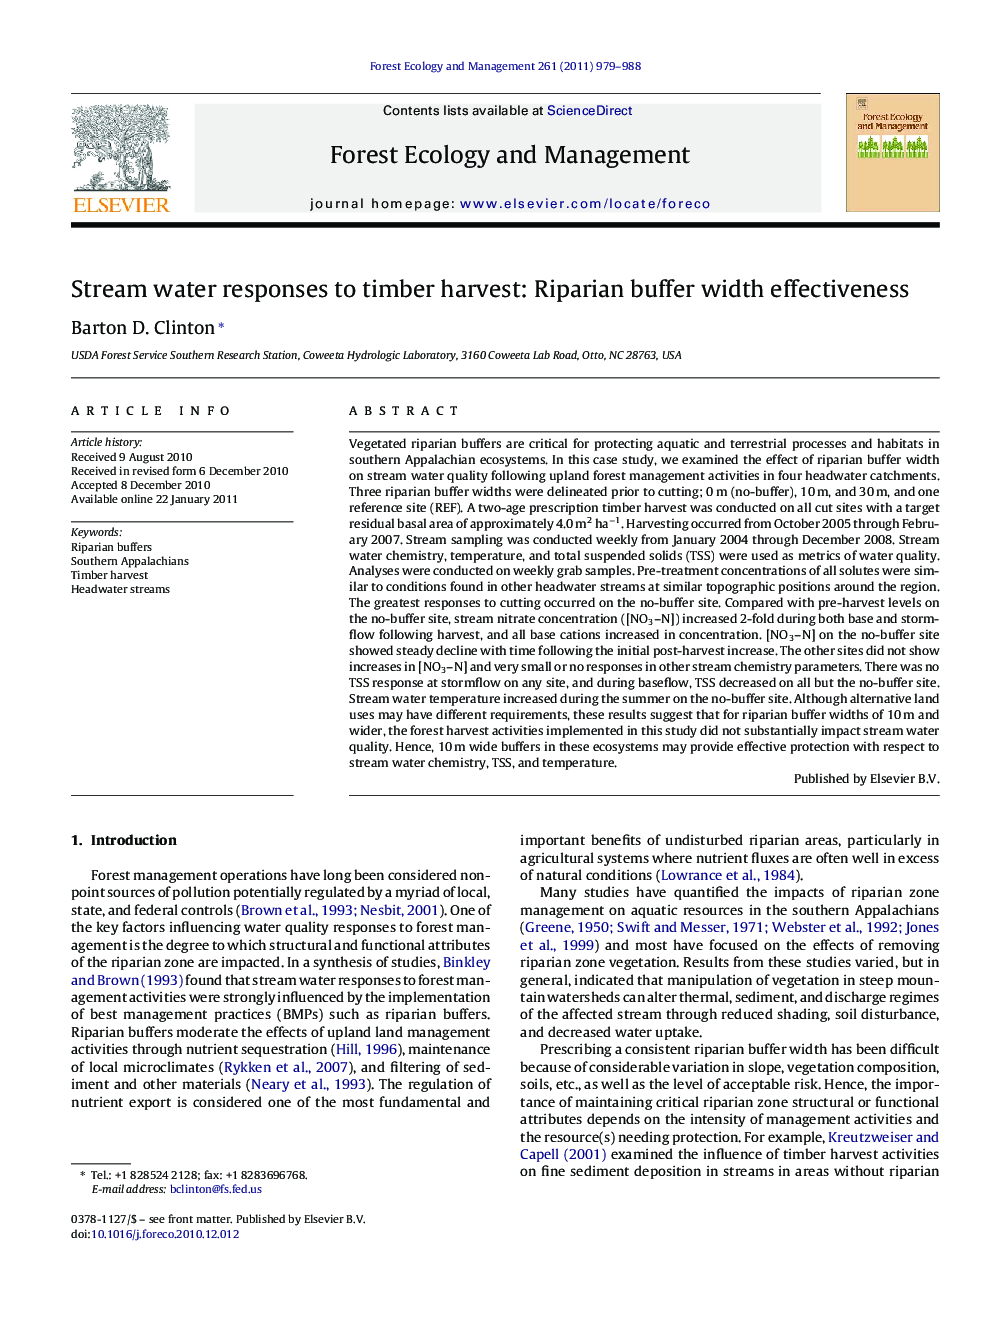 Stream water responses to timber harvest: Riparian buffer width effectiveness